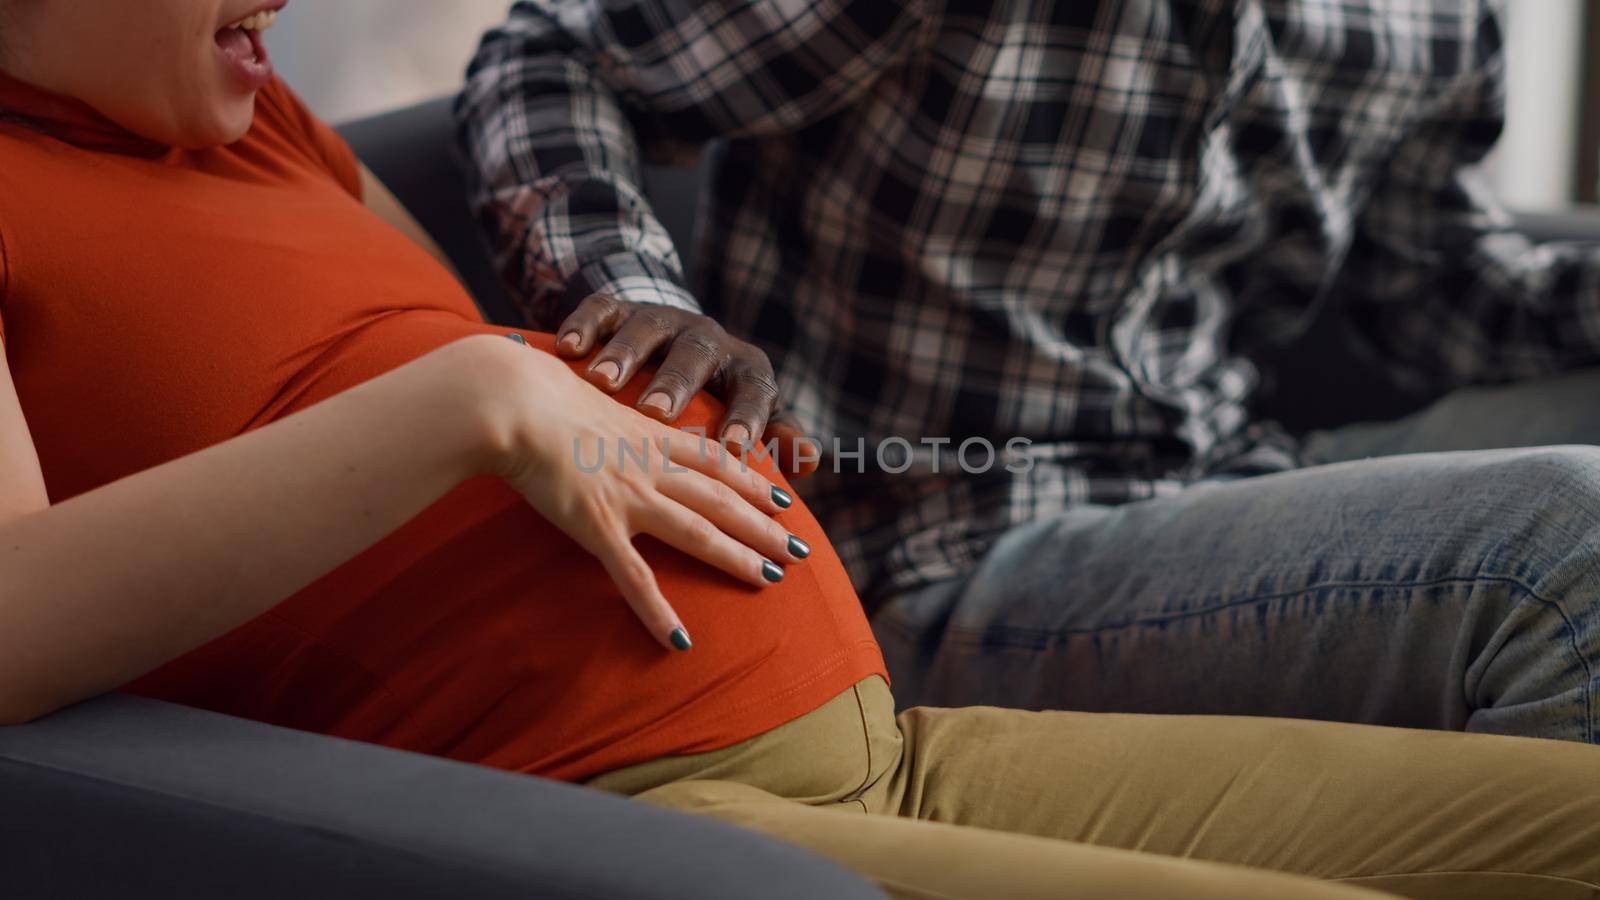 Close up of interracial hands of young couple on belly expecting child while sitting on sofa. Multi ethnic people touching baby bump feeling cheerful and talking about parenthood